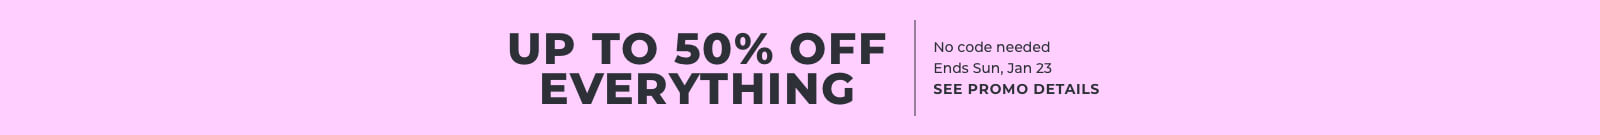 Up to 50% off everything, no code needed, ends Sun, Jan 23, see promo details